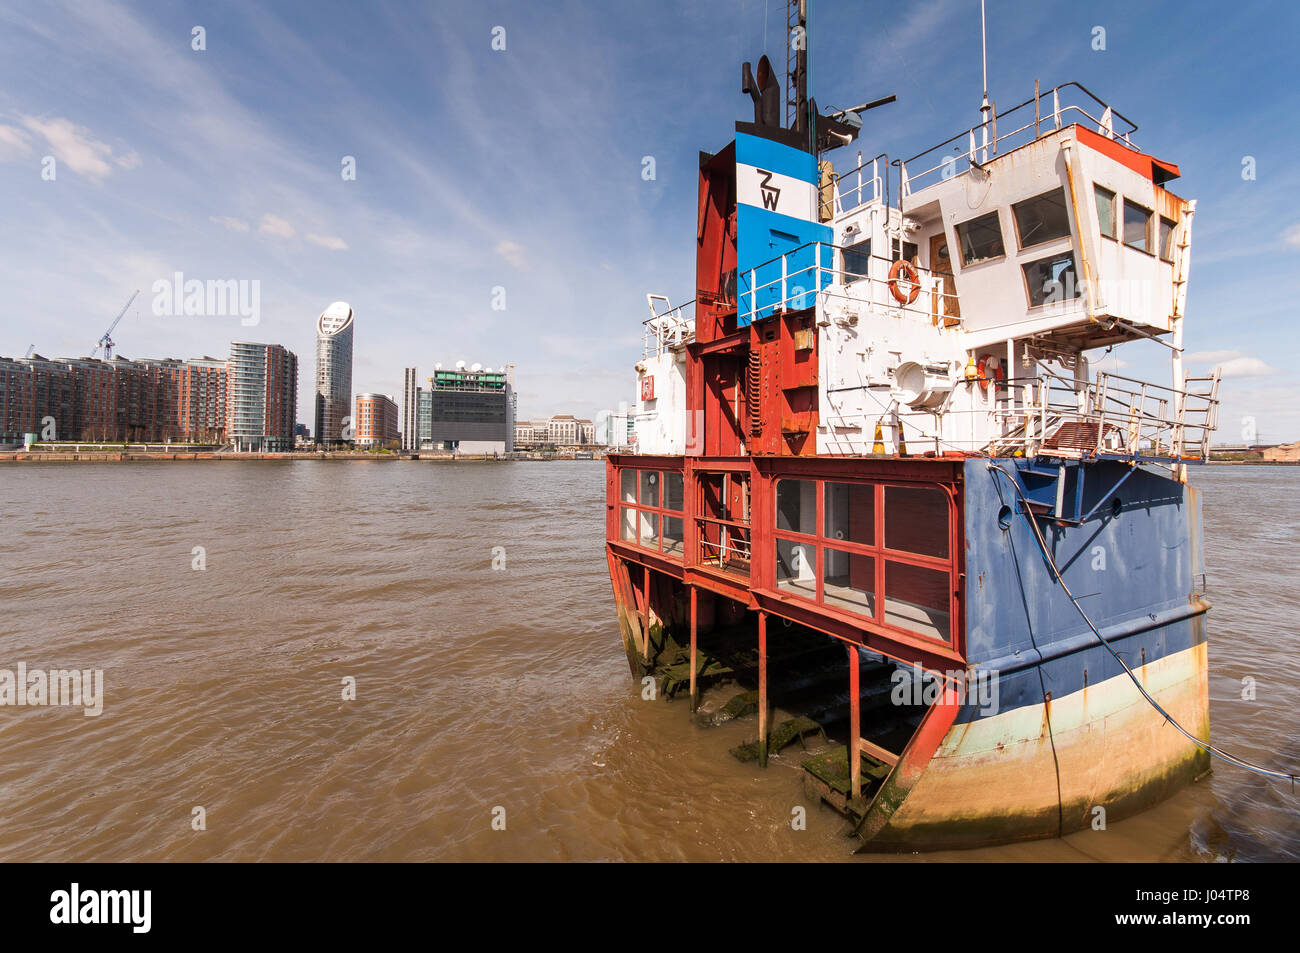 London, England, UK - April 10, 2010: A section of a small cargo boat fixed in the River Thames at North Greenwich, by artist Richard Wilson. Stock Photo